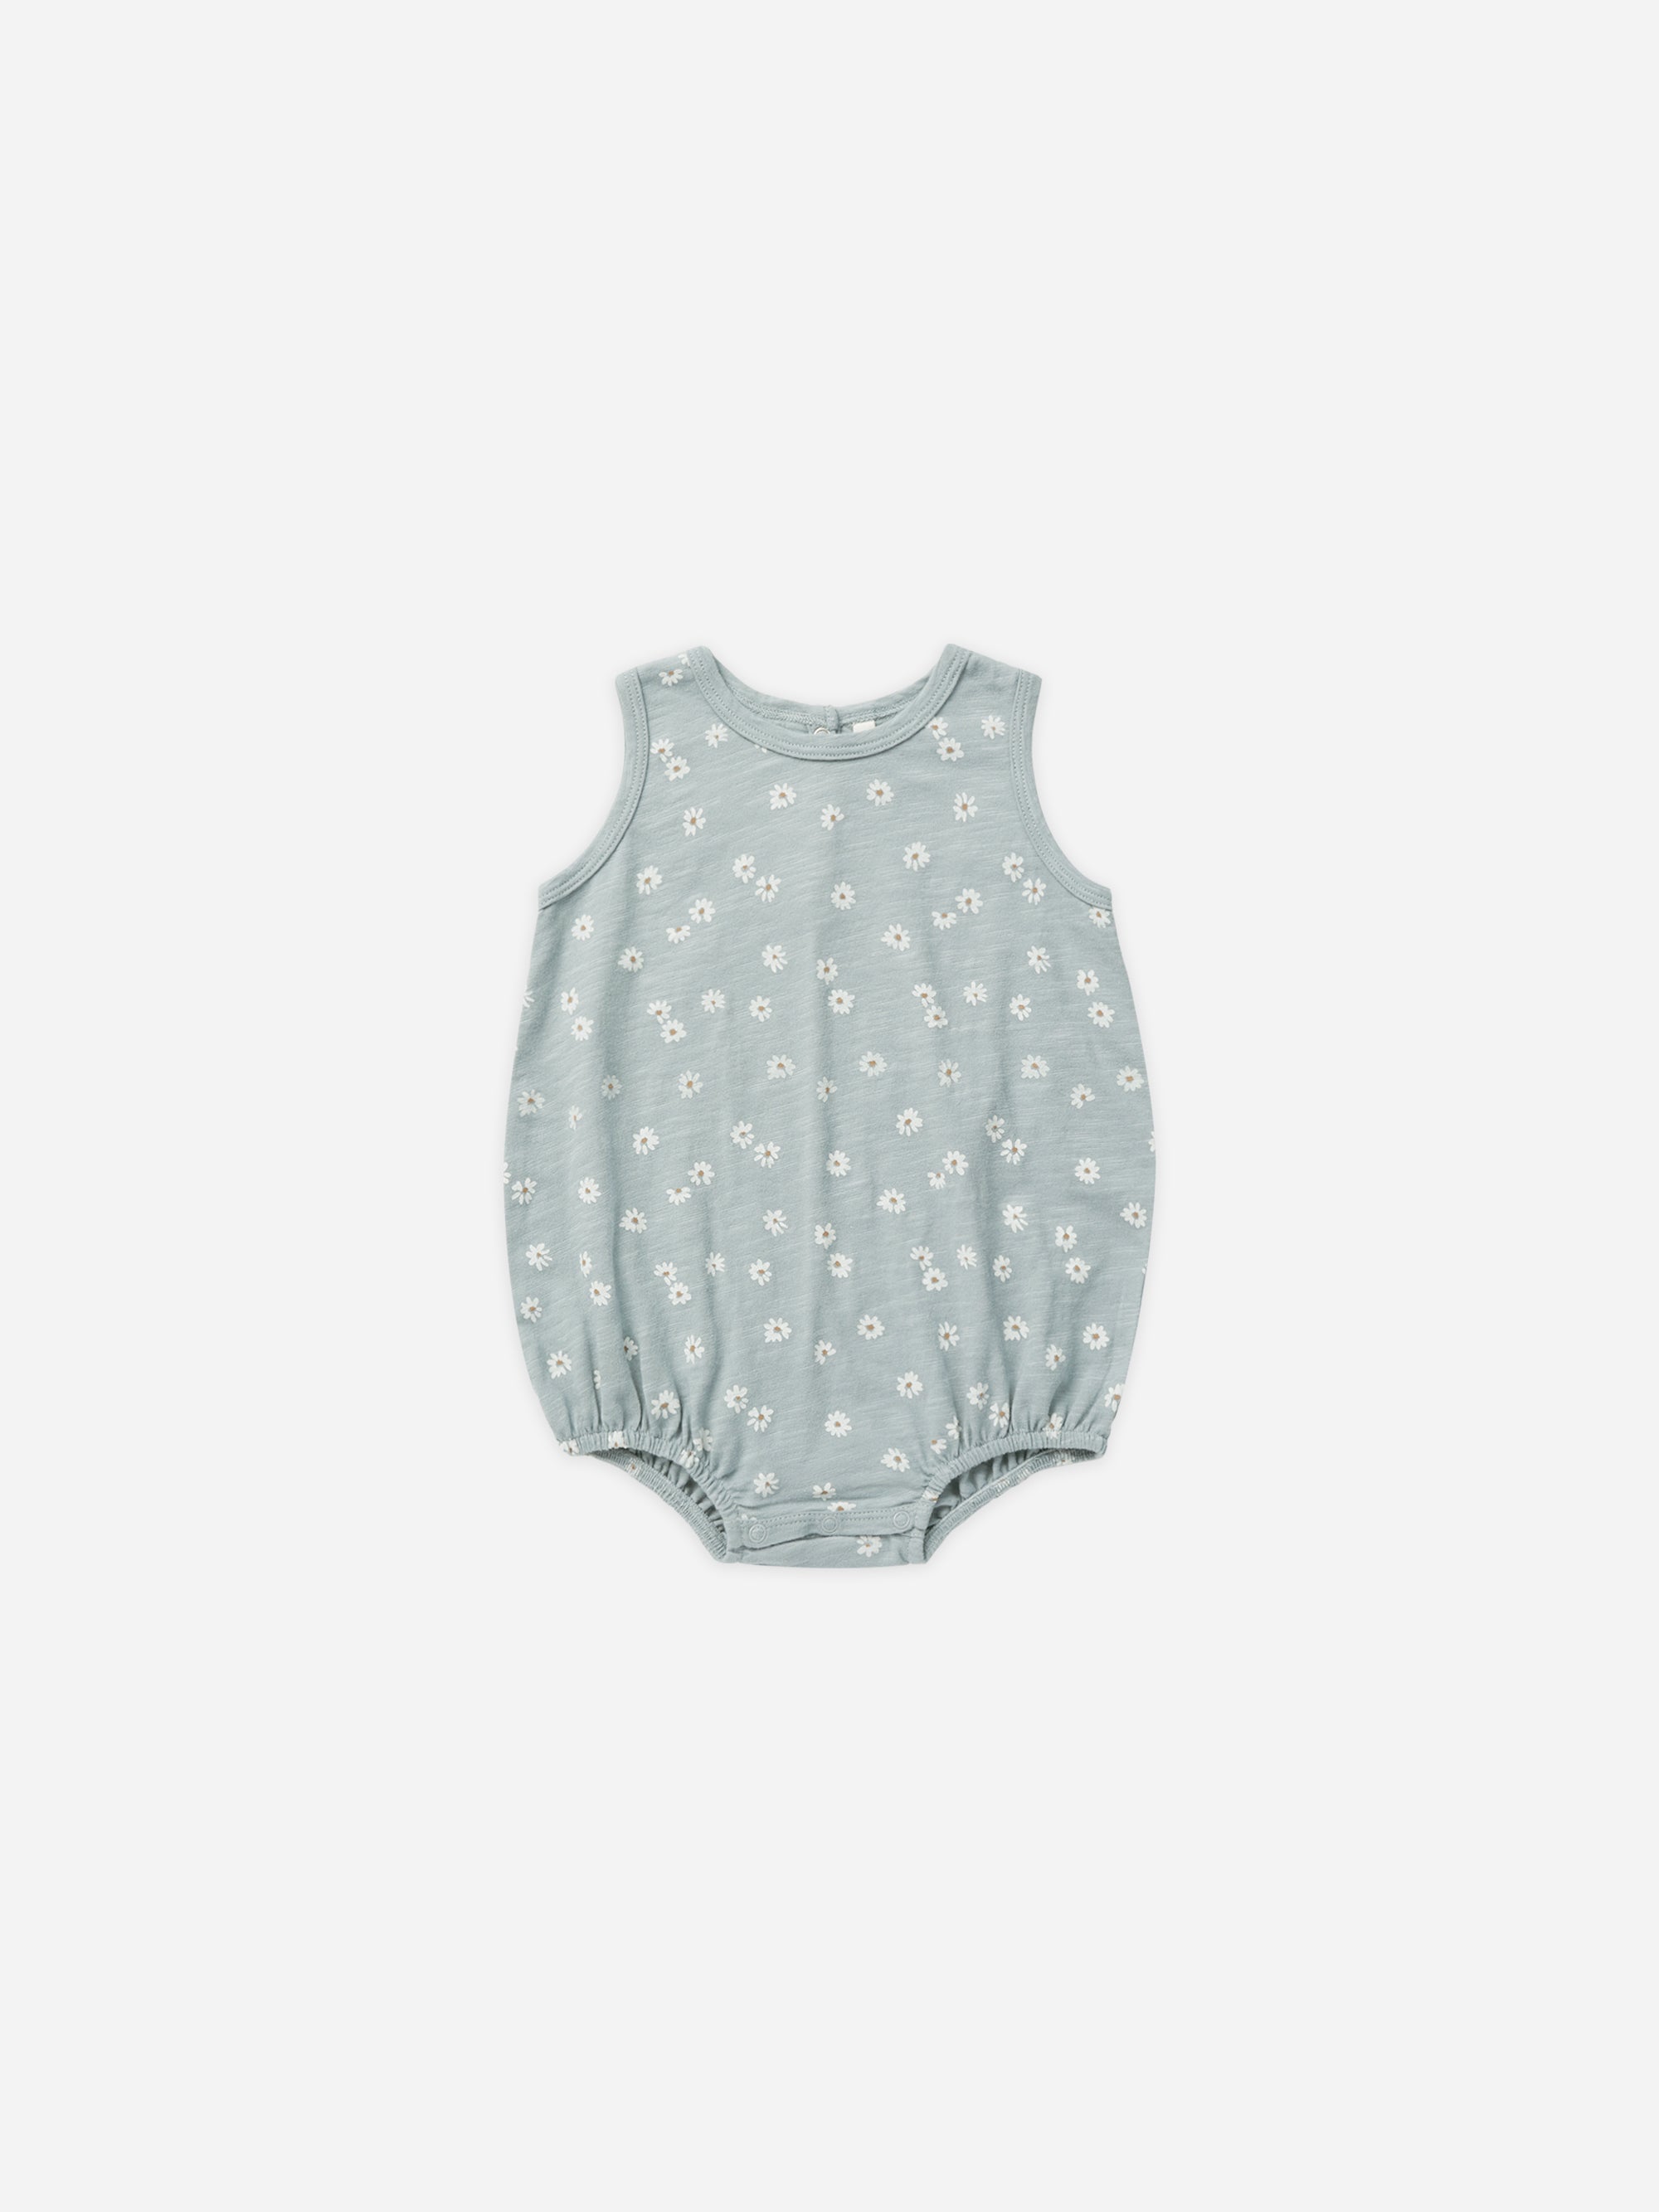 Bubble Onesie || Blue Daisy - Rylee + Cru | Kids Clothes | Trendy Baby Clothes | Modern Infant Outfits |